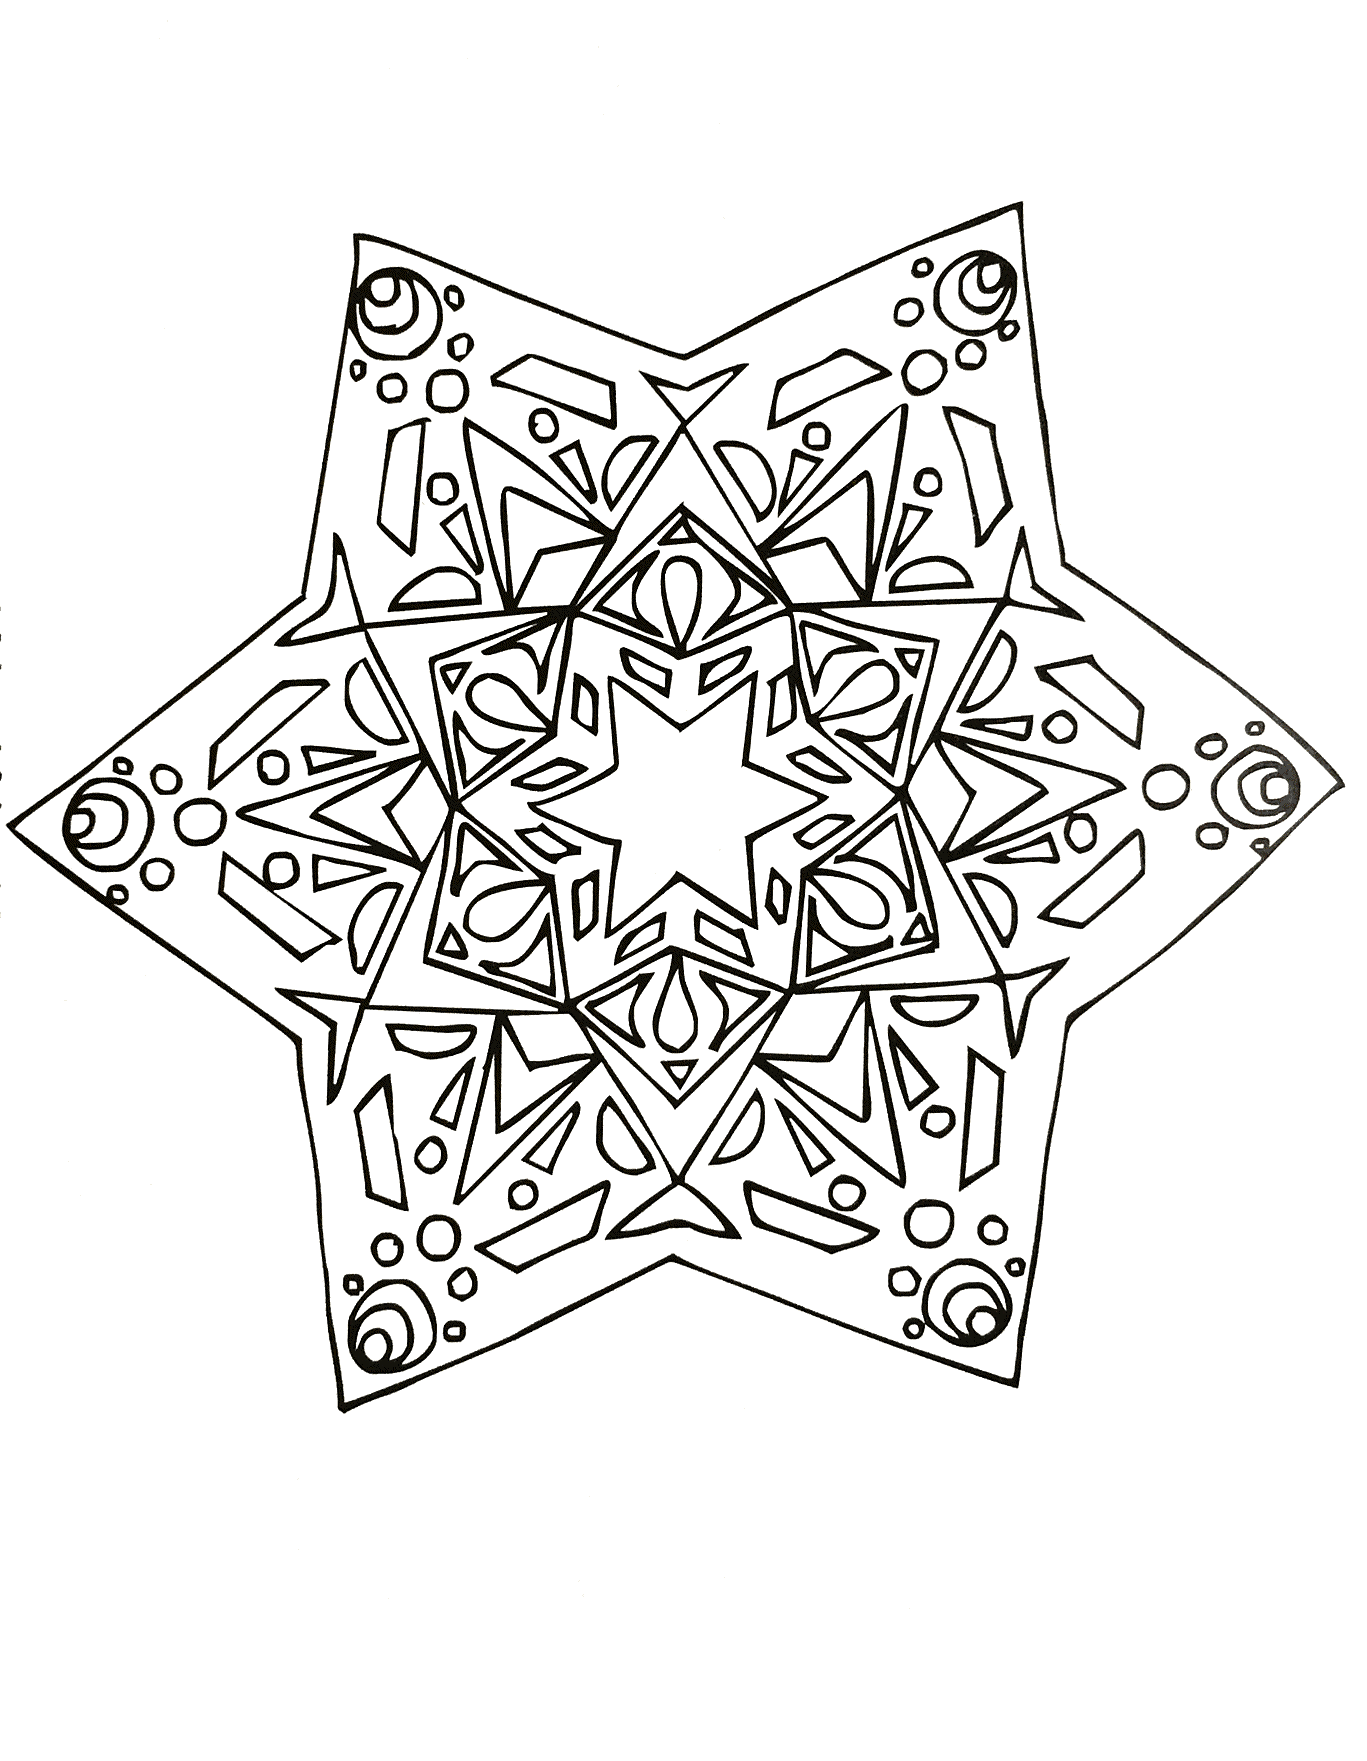 If you are ready to spend long minutes of relaxation, get ready to color this complex Mandala, looking like a big Star ... You can use many colors if you wish. You must clear your mind and allow yourself to forget all your worries and responsibilities.